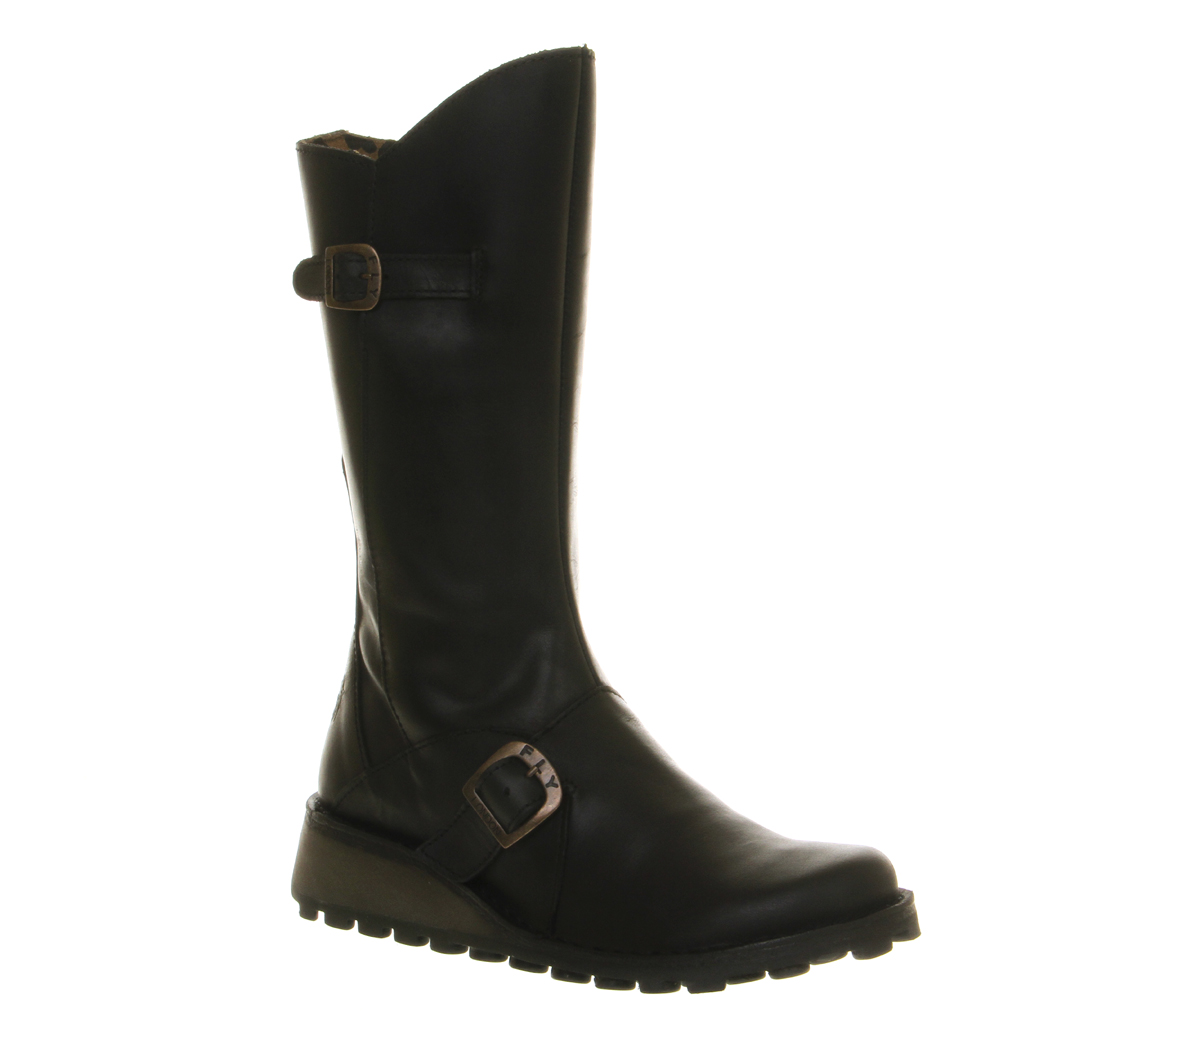 Fly LondonFly Mes Wedge Calf bootsBlack Rugged